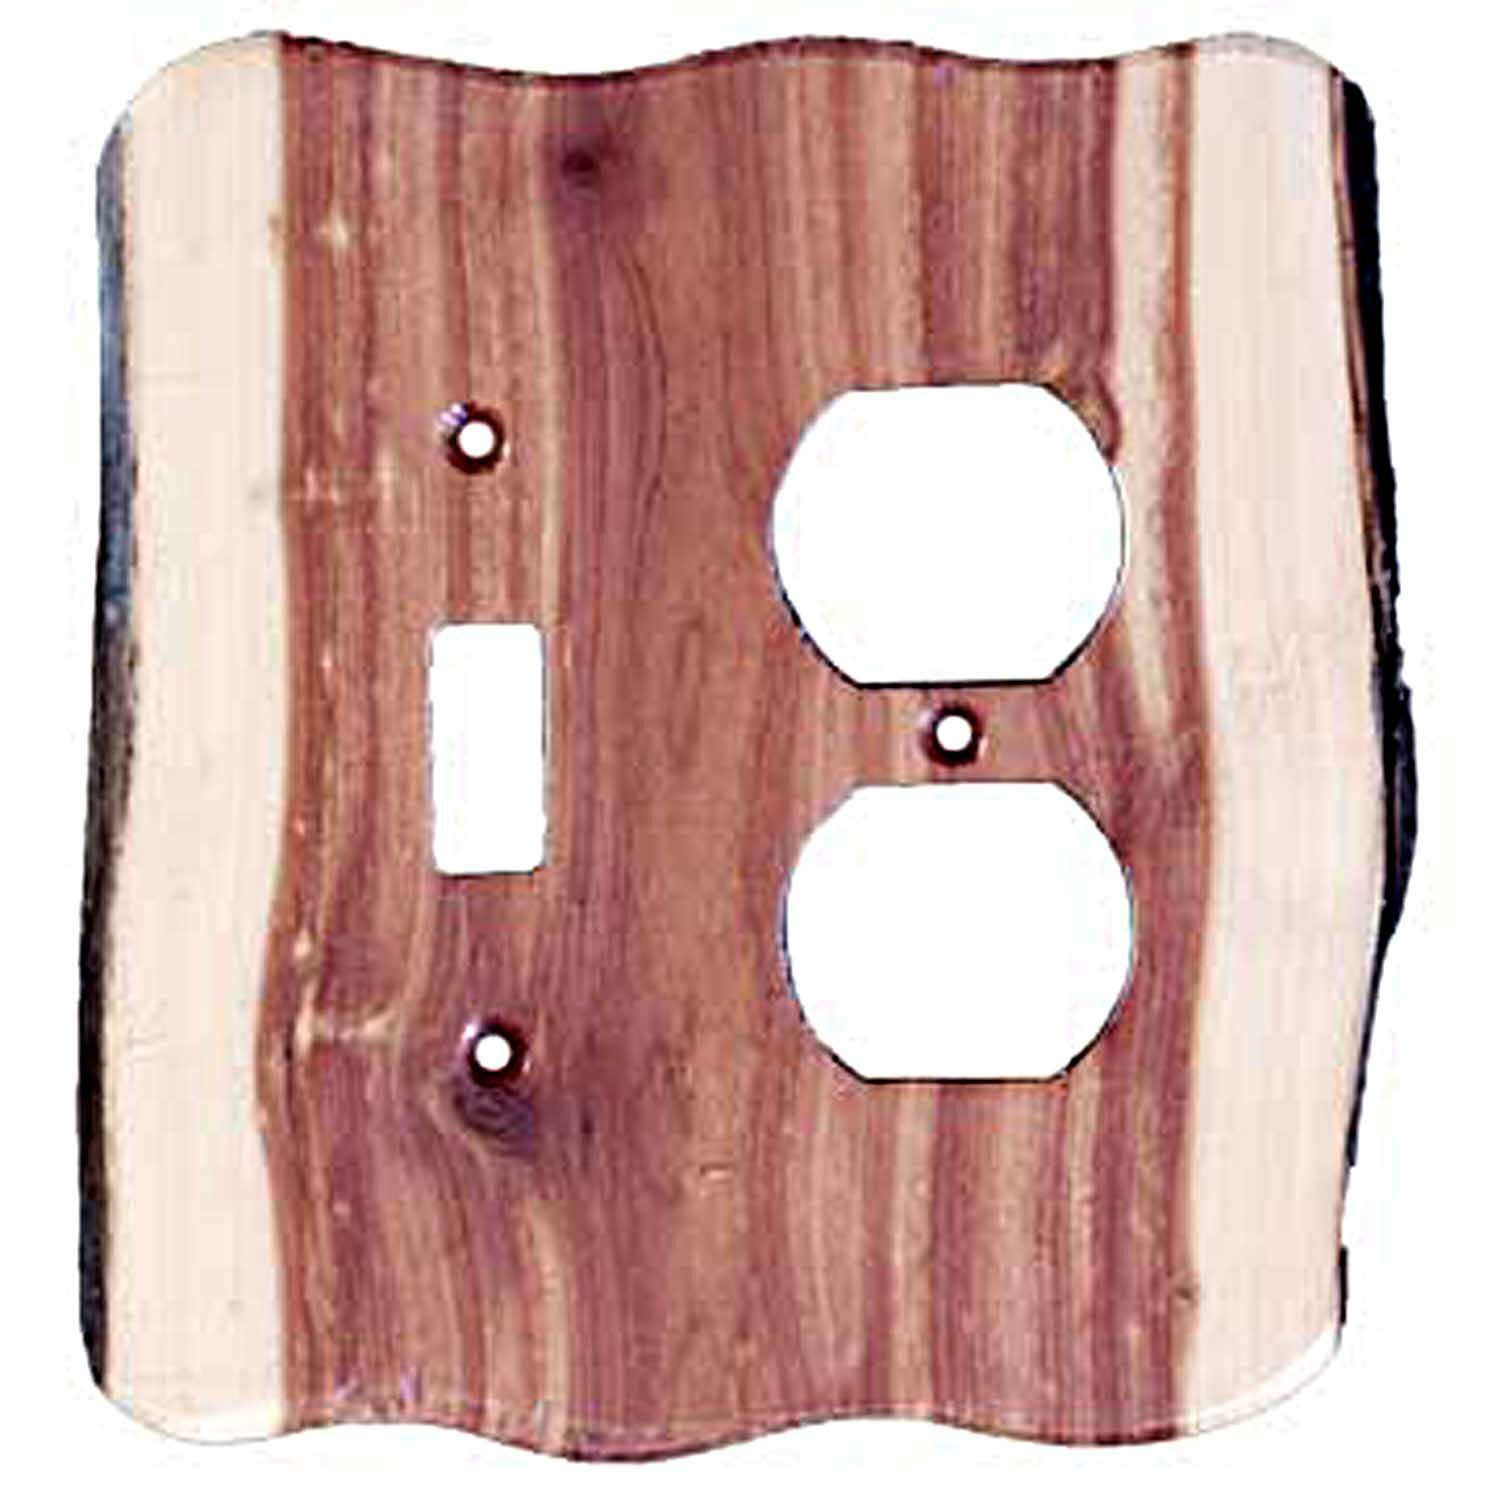 IRVIN'S TINWARE RUSTIC TRIPLE SWITCHPLATE